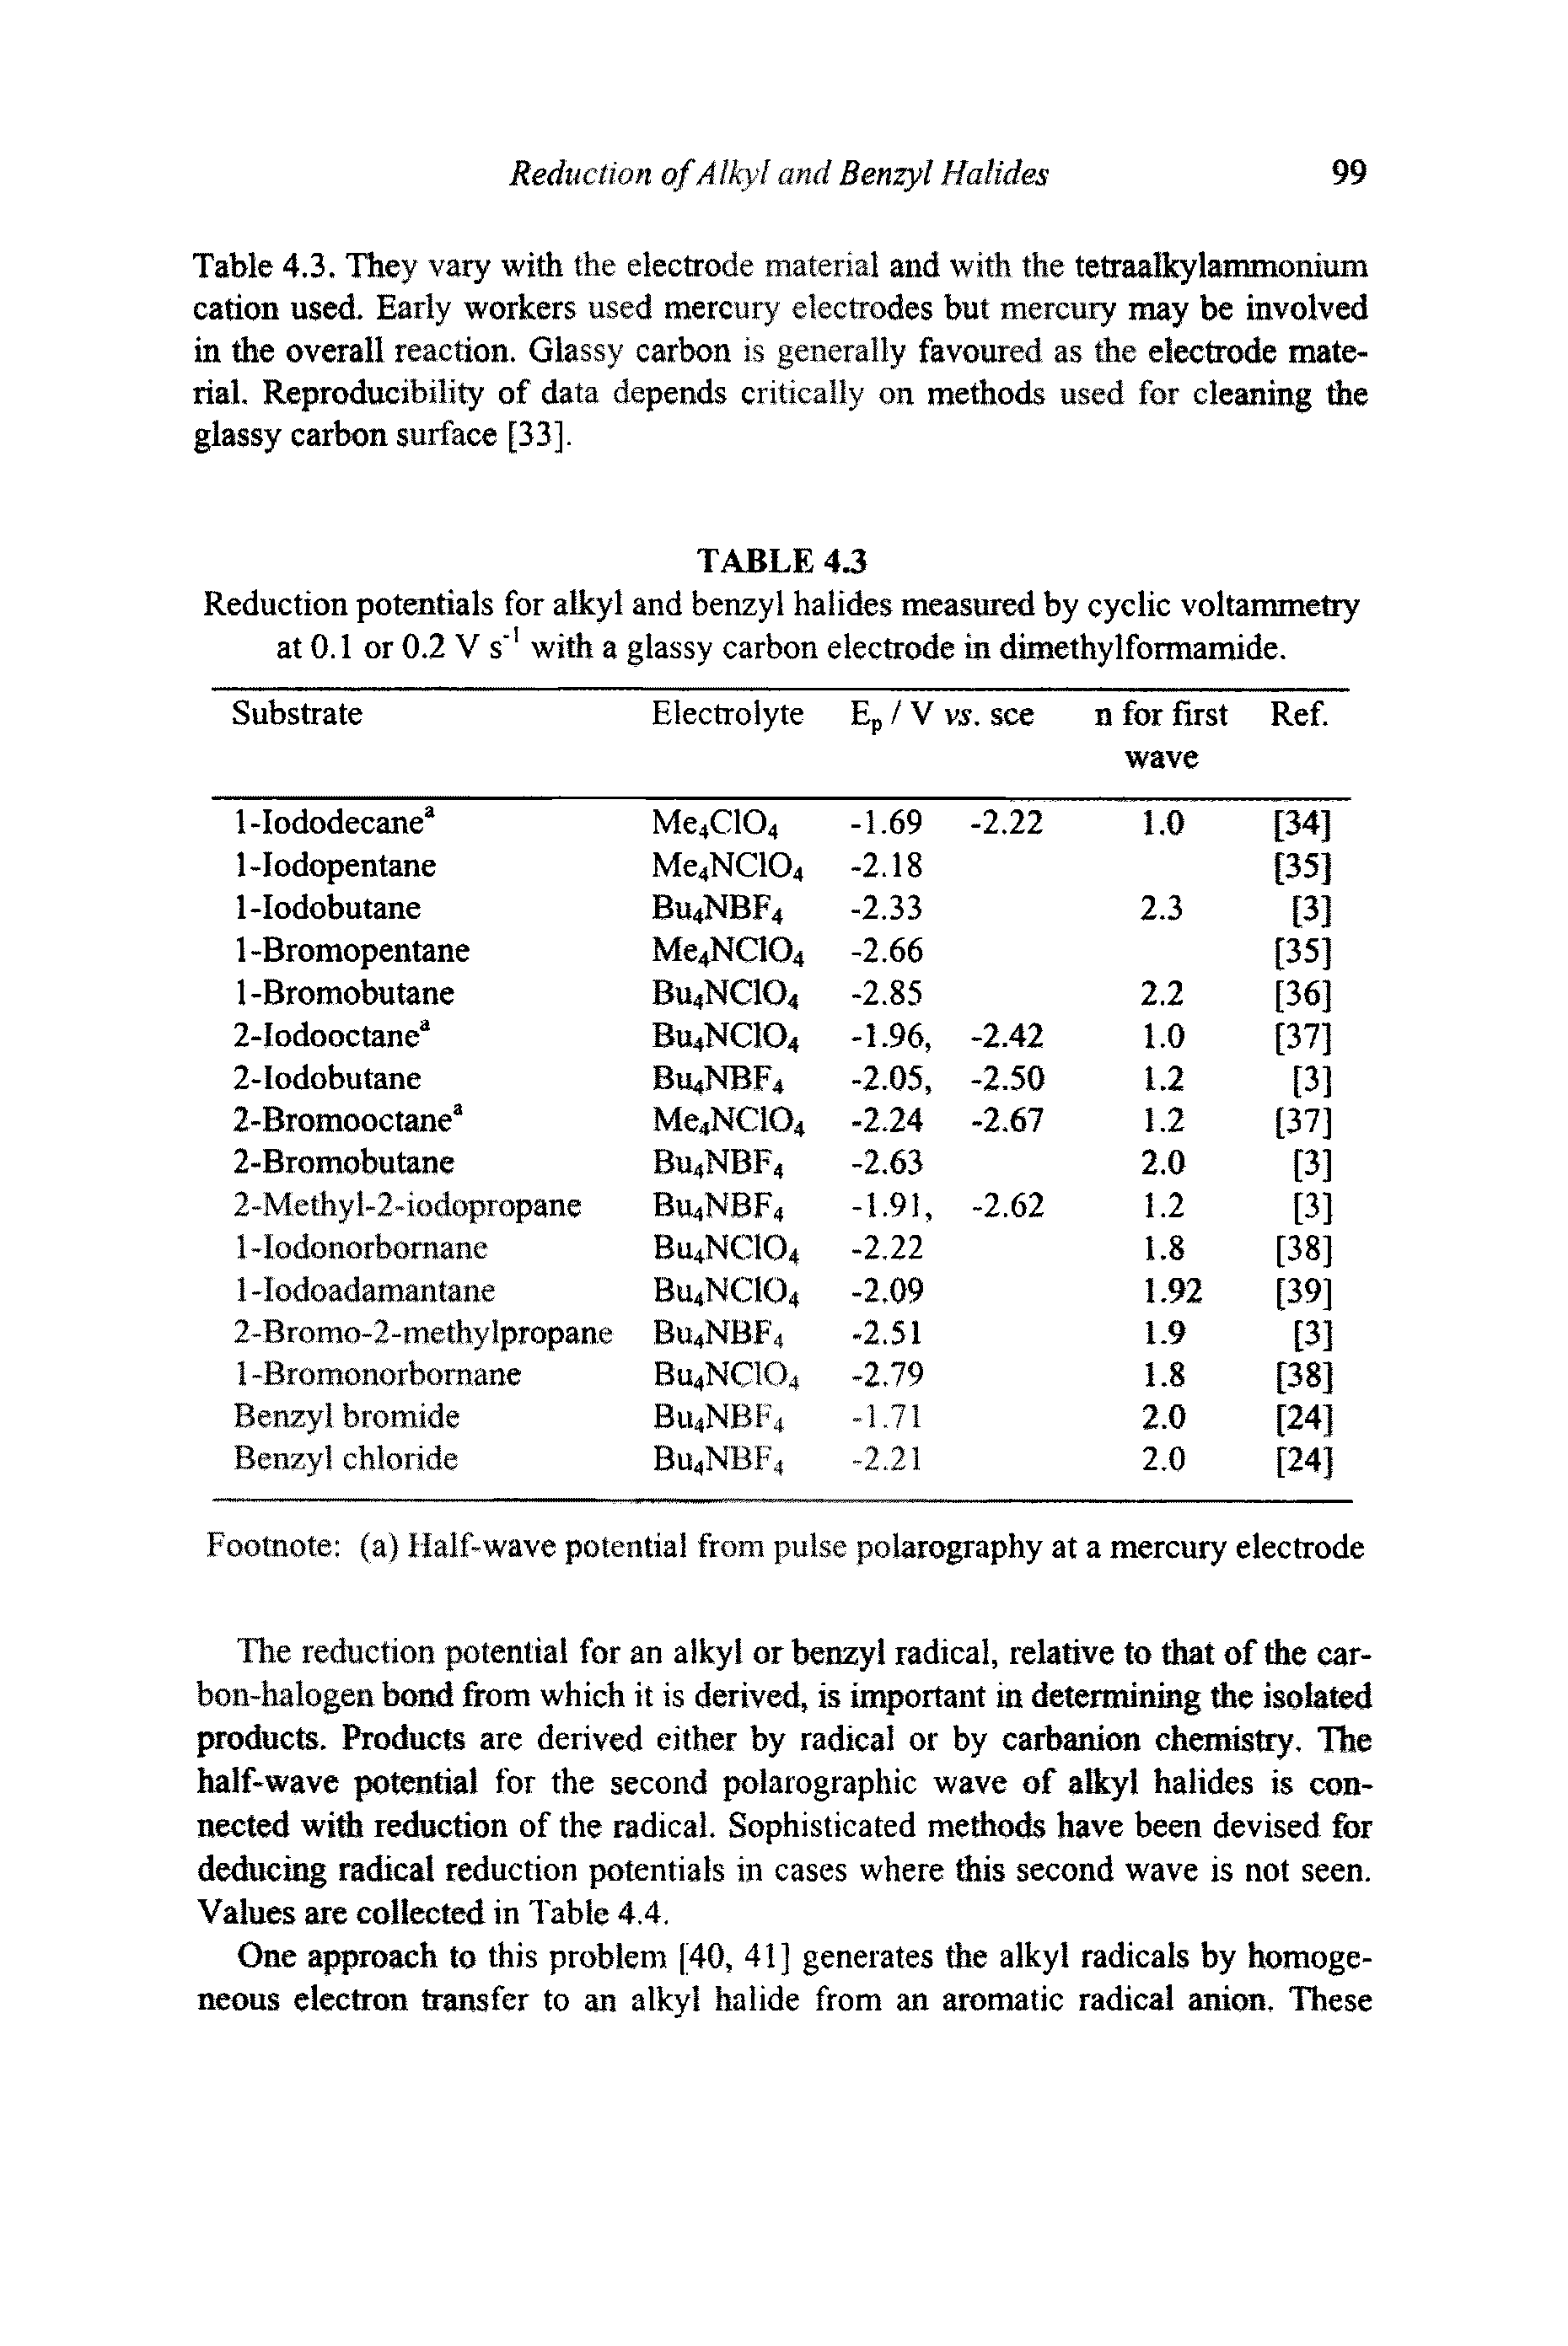 Table 4.3. They vary with the electrode material and with the tetraalkylammonium cation used. Early workers used mercury electrodes but mercury may be involved in the overall reaction. Glassy carbon is generally favoured as the electrode material. Reproducibility of data depends critically on methods used for cleaning the glassy carbon surface [33].